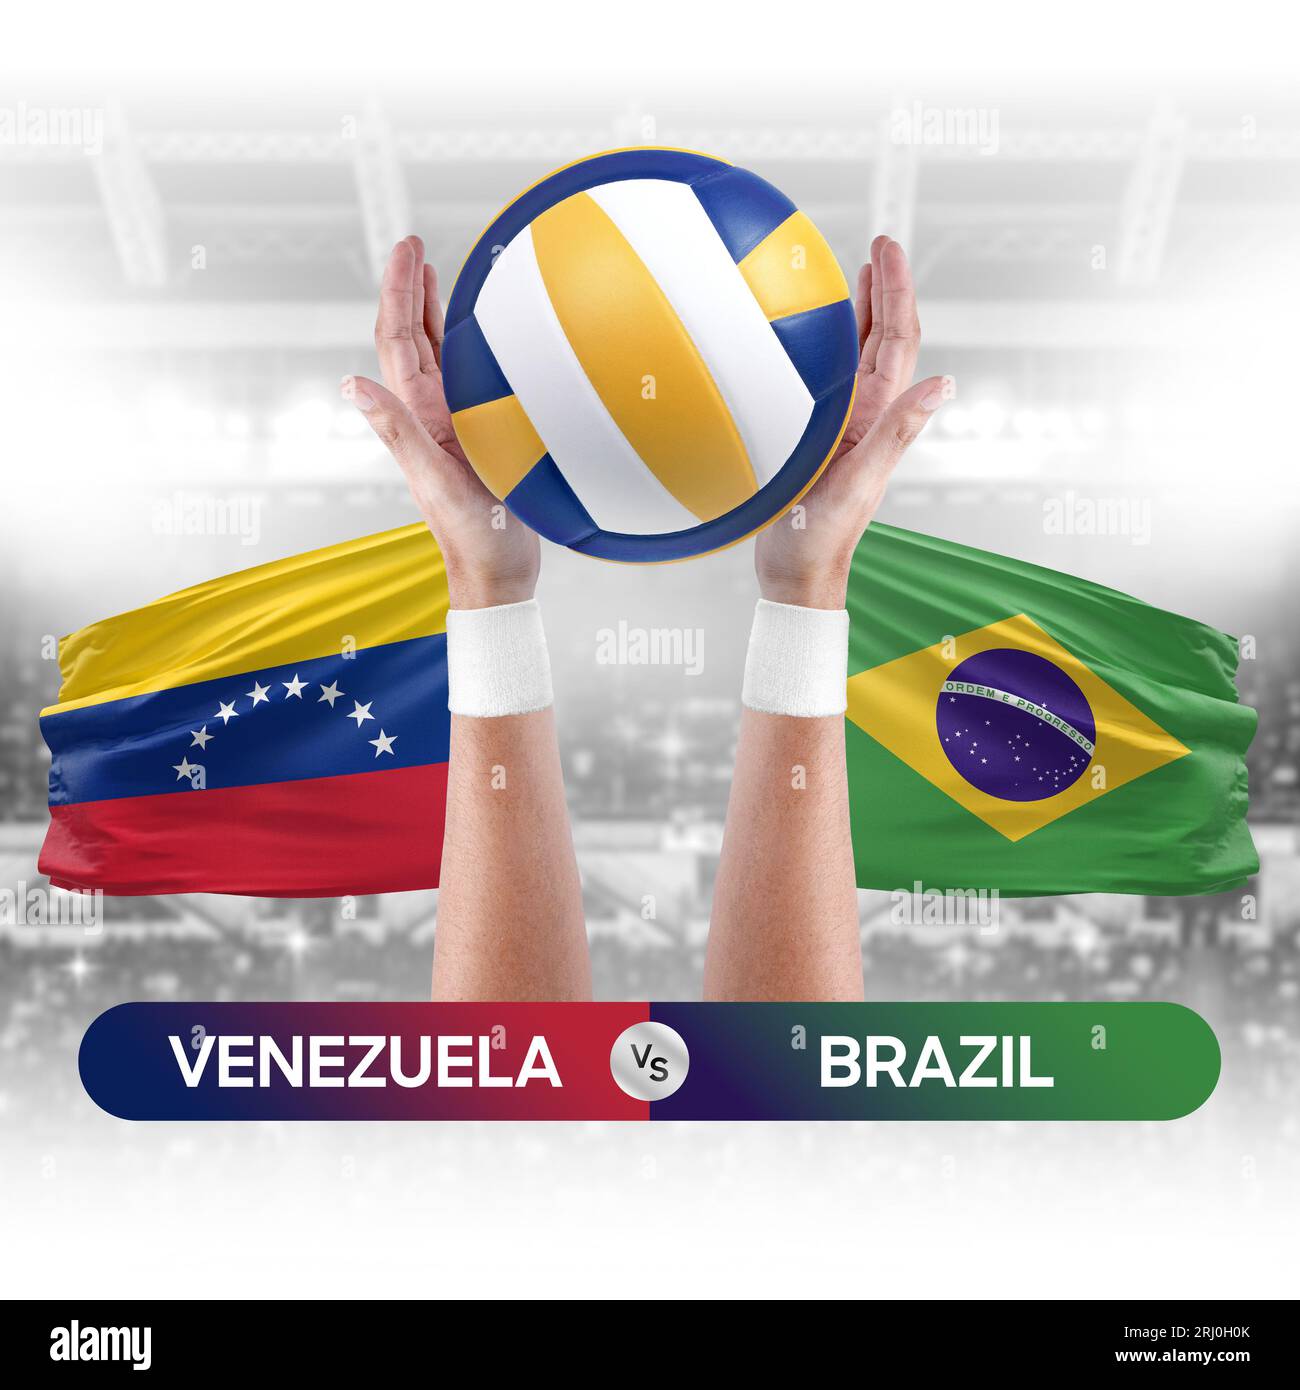 Venezuela vs Brazil national teams volleyball volley ball match competition concept. Stock Photo